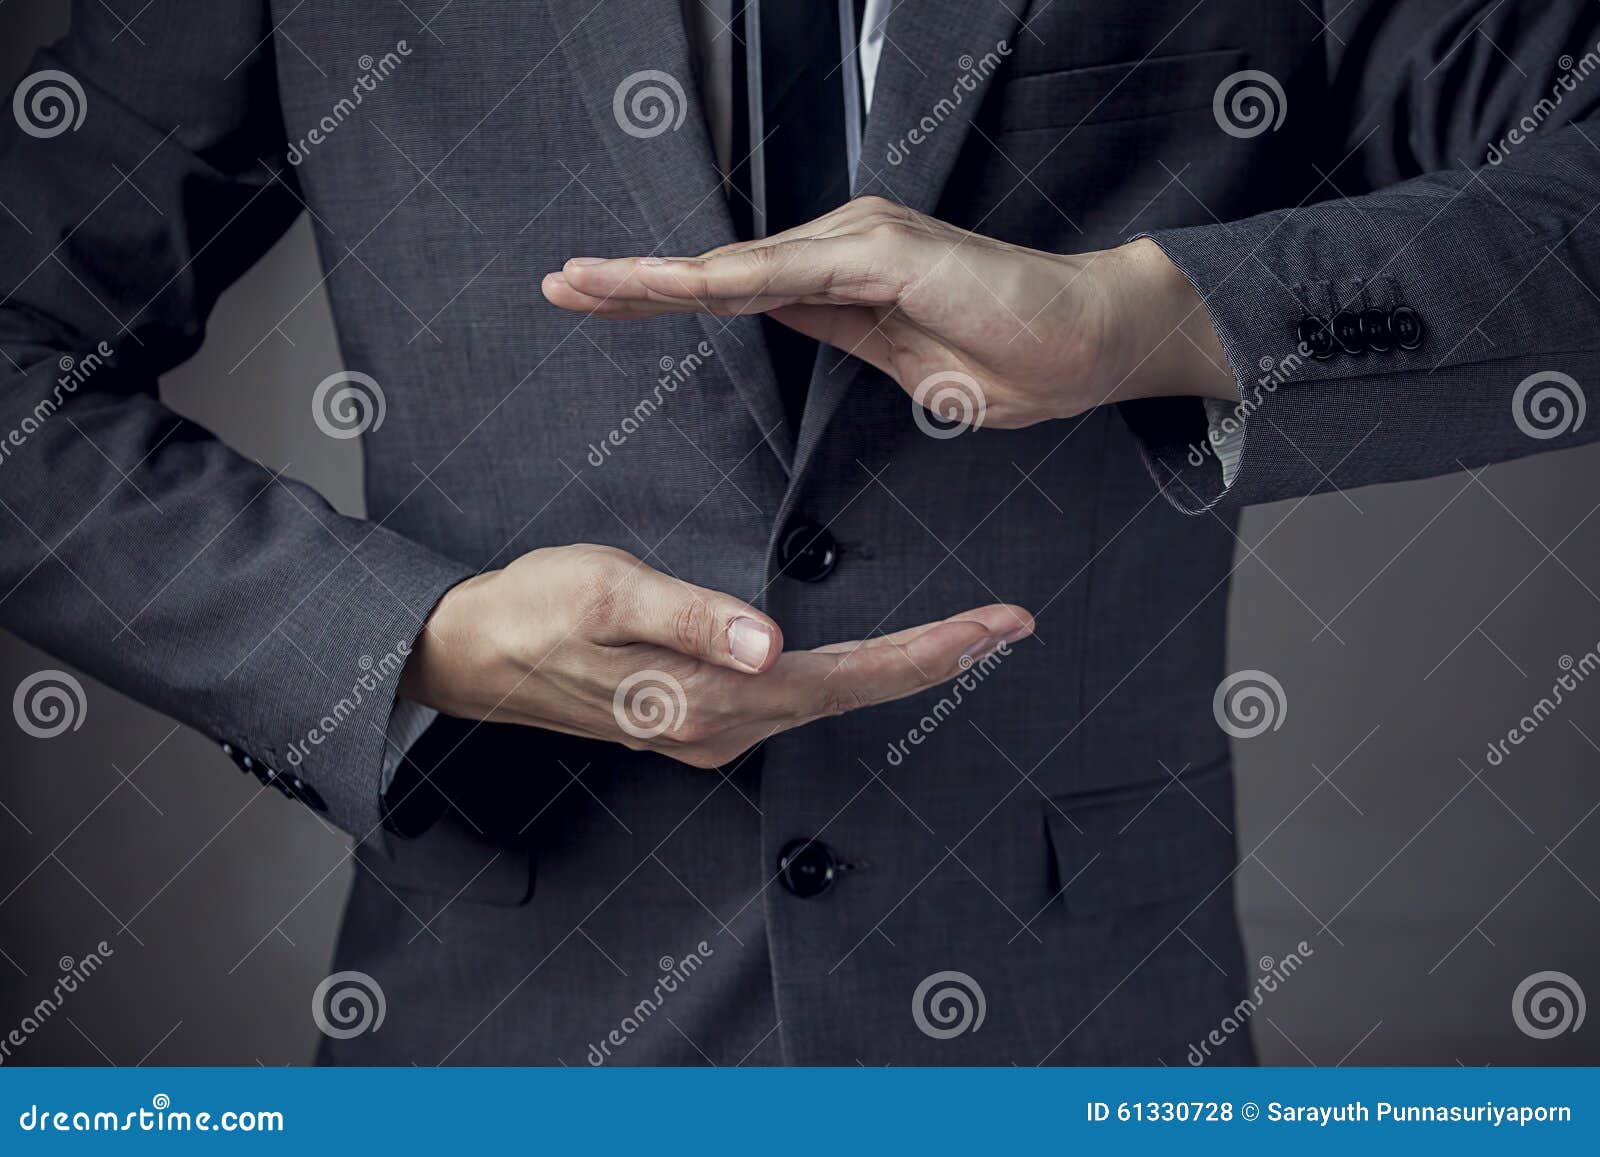 businessman in suit with two hands in position to protect something